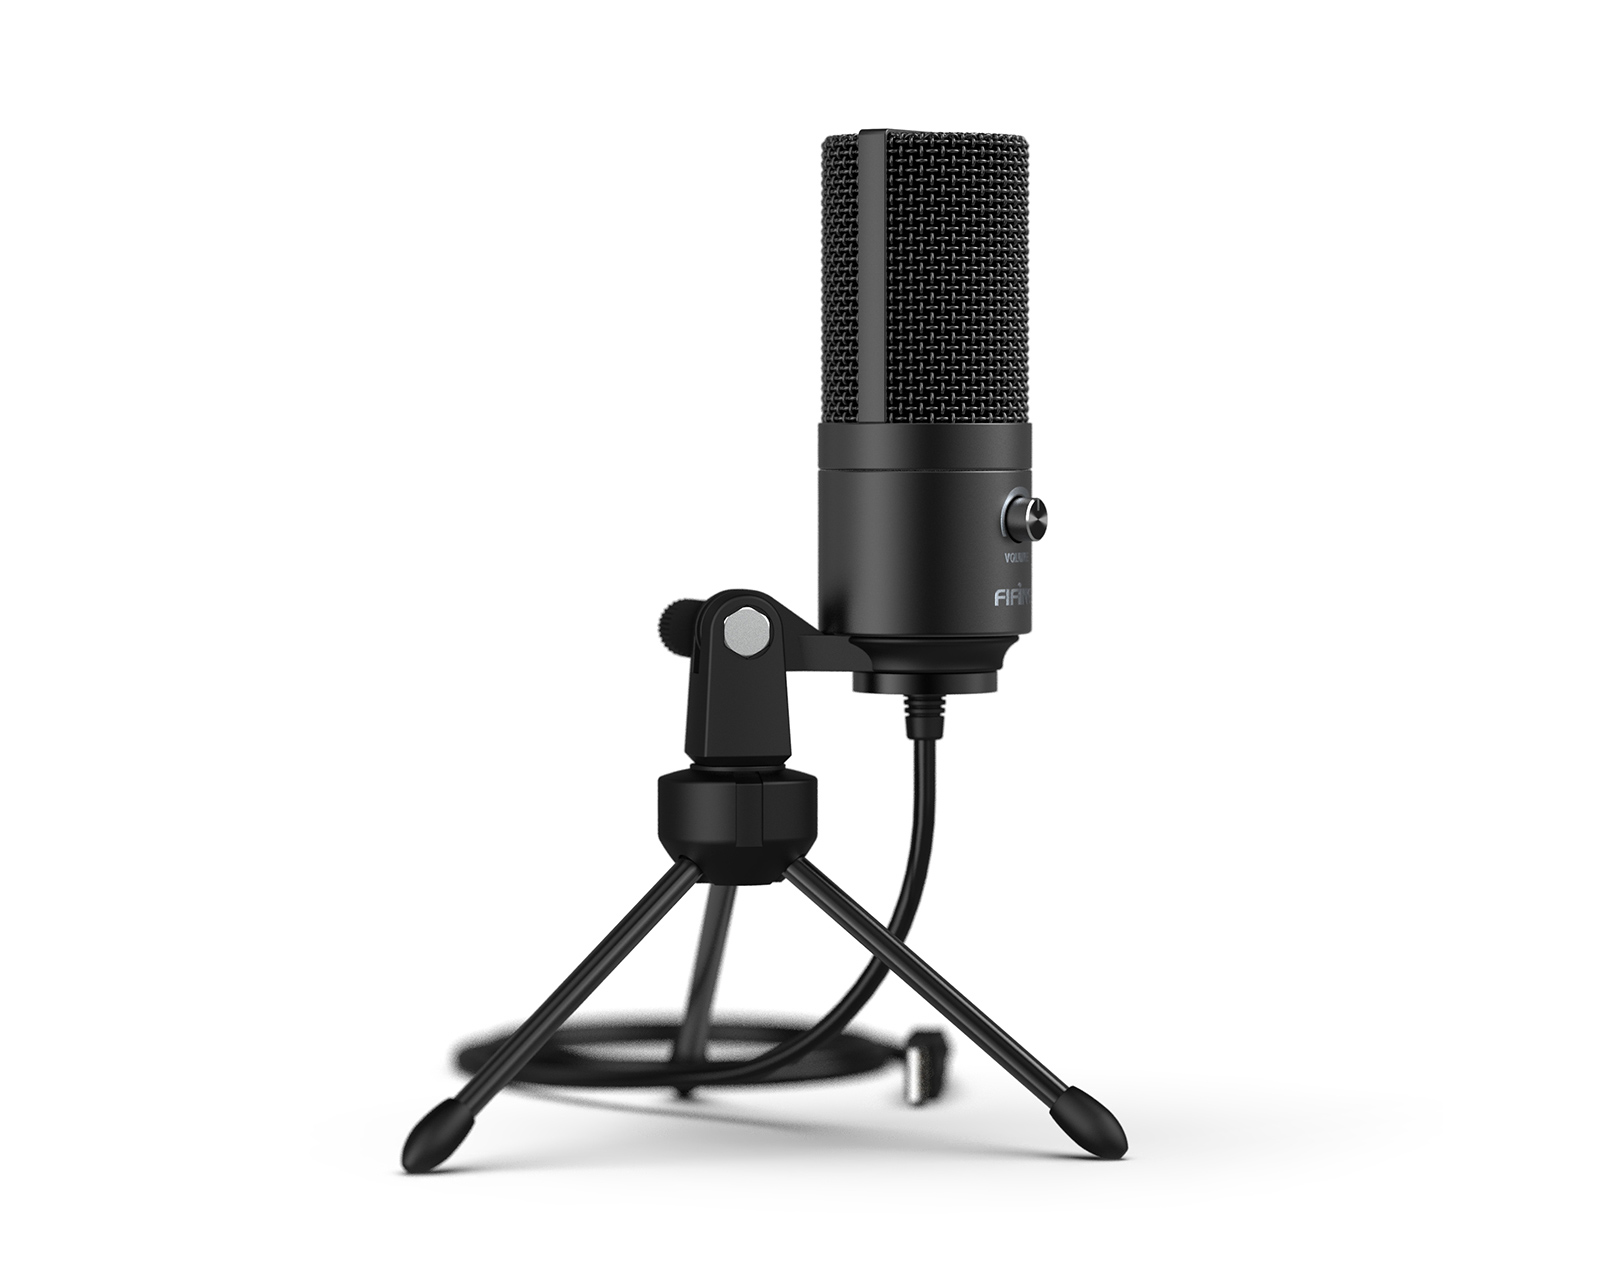 Fifine k669b review: a cheap professional USB microphone 